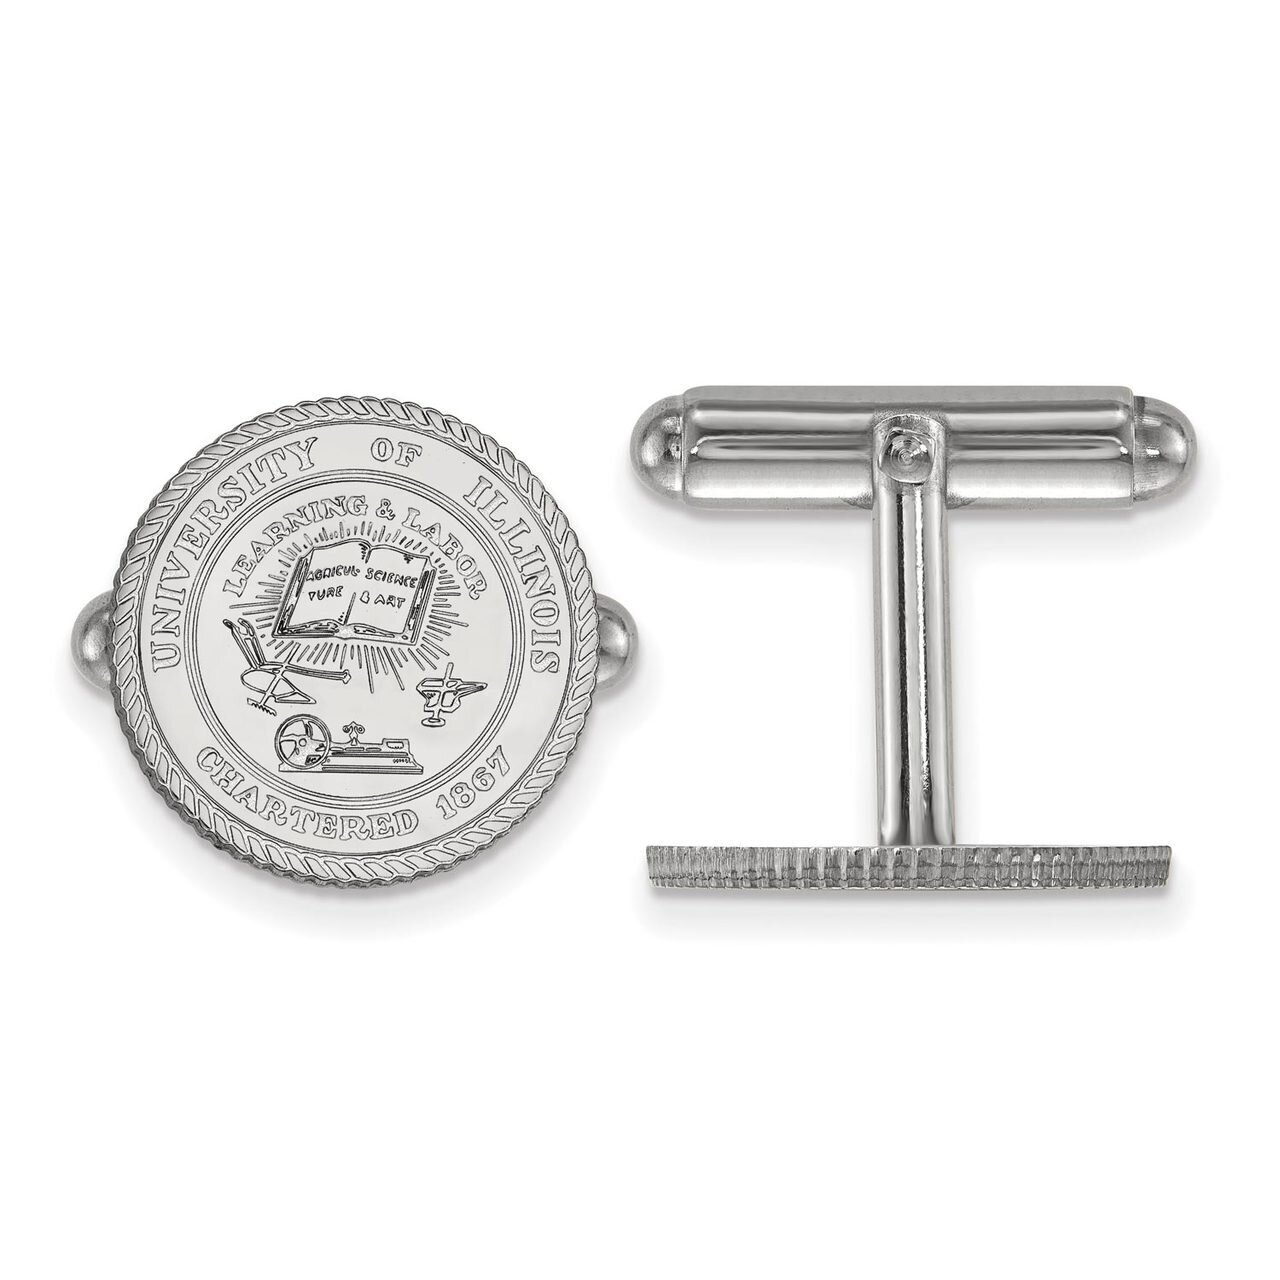 University of Illinois Crest Cuff Link Sterling Silver SS067UIL